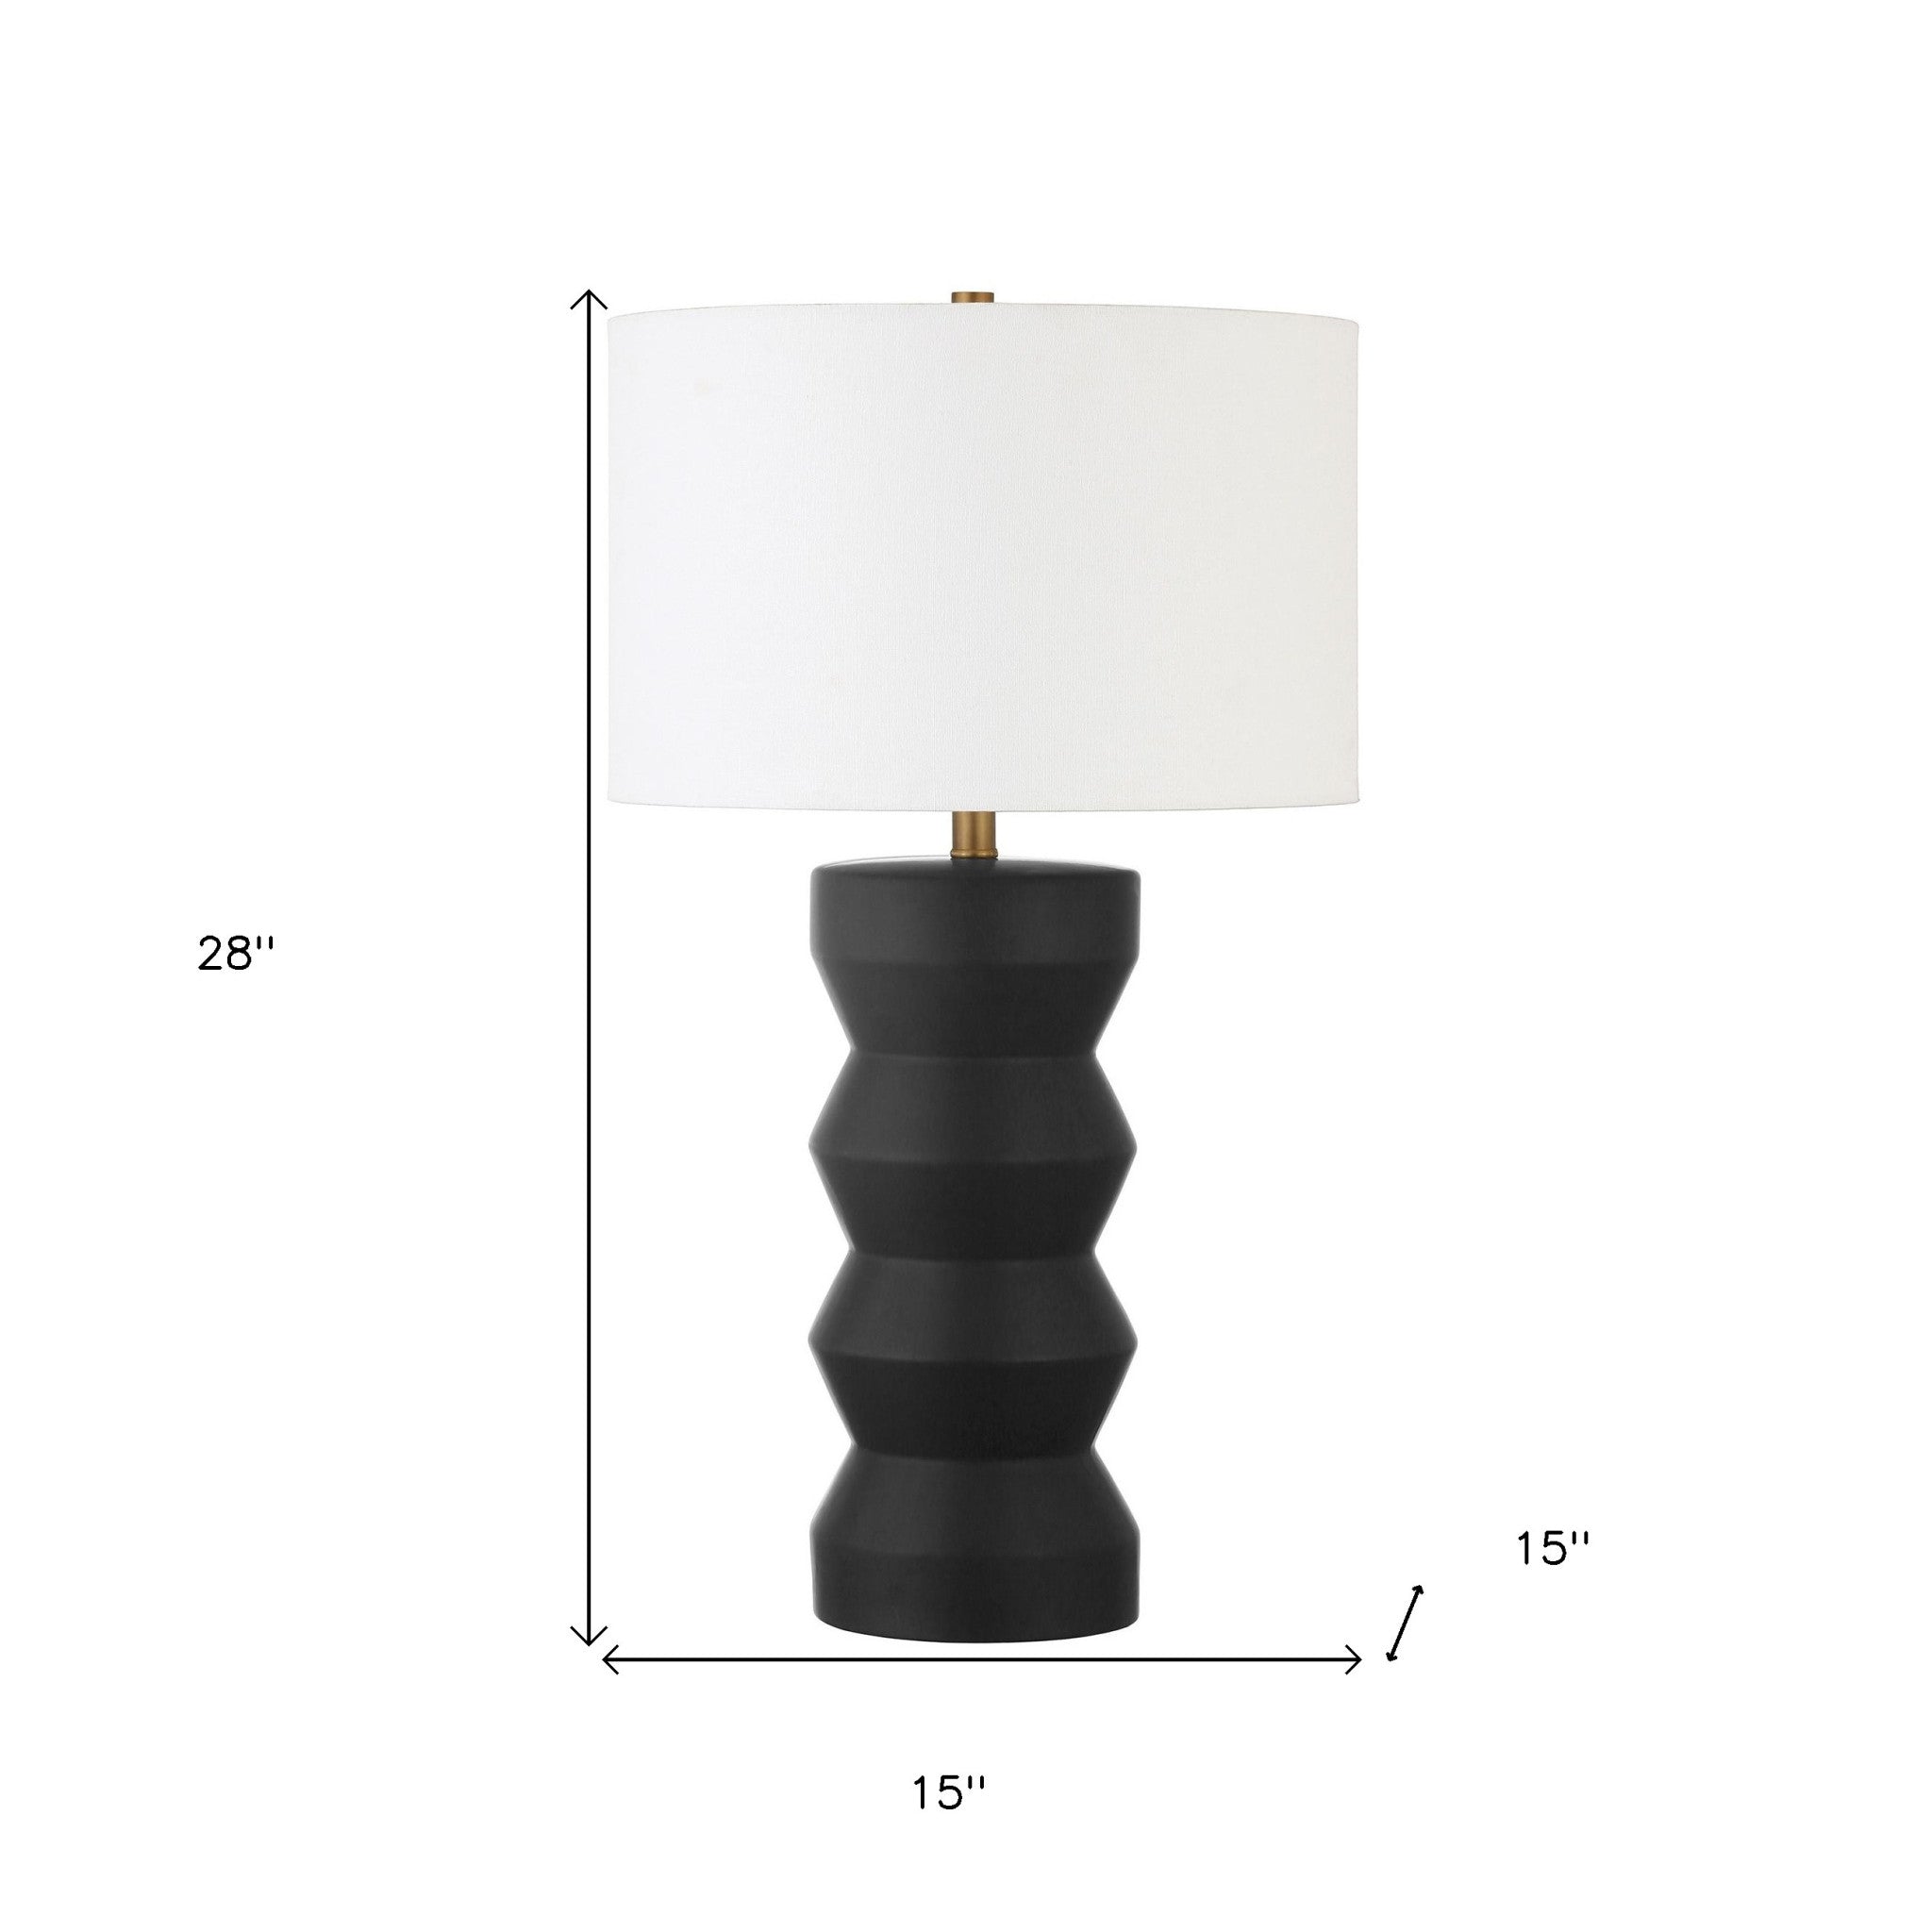 28" Black Ceramic Table Lamp With White Drum Shade